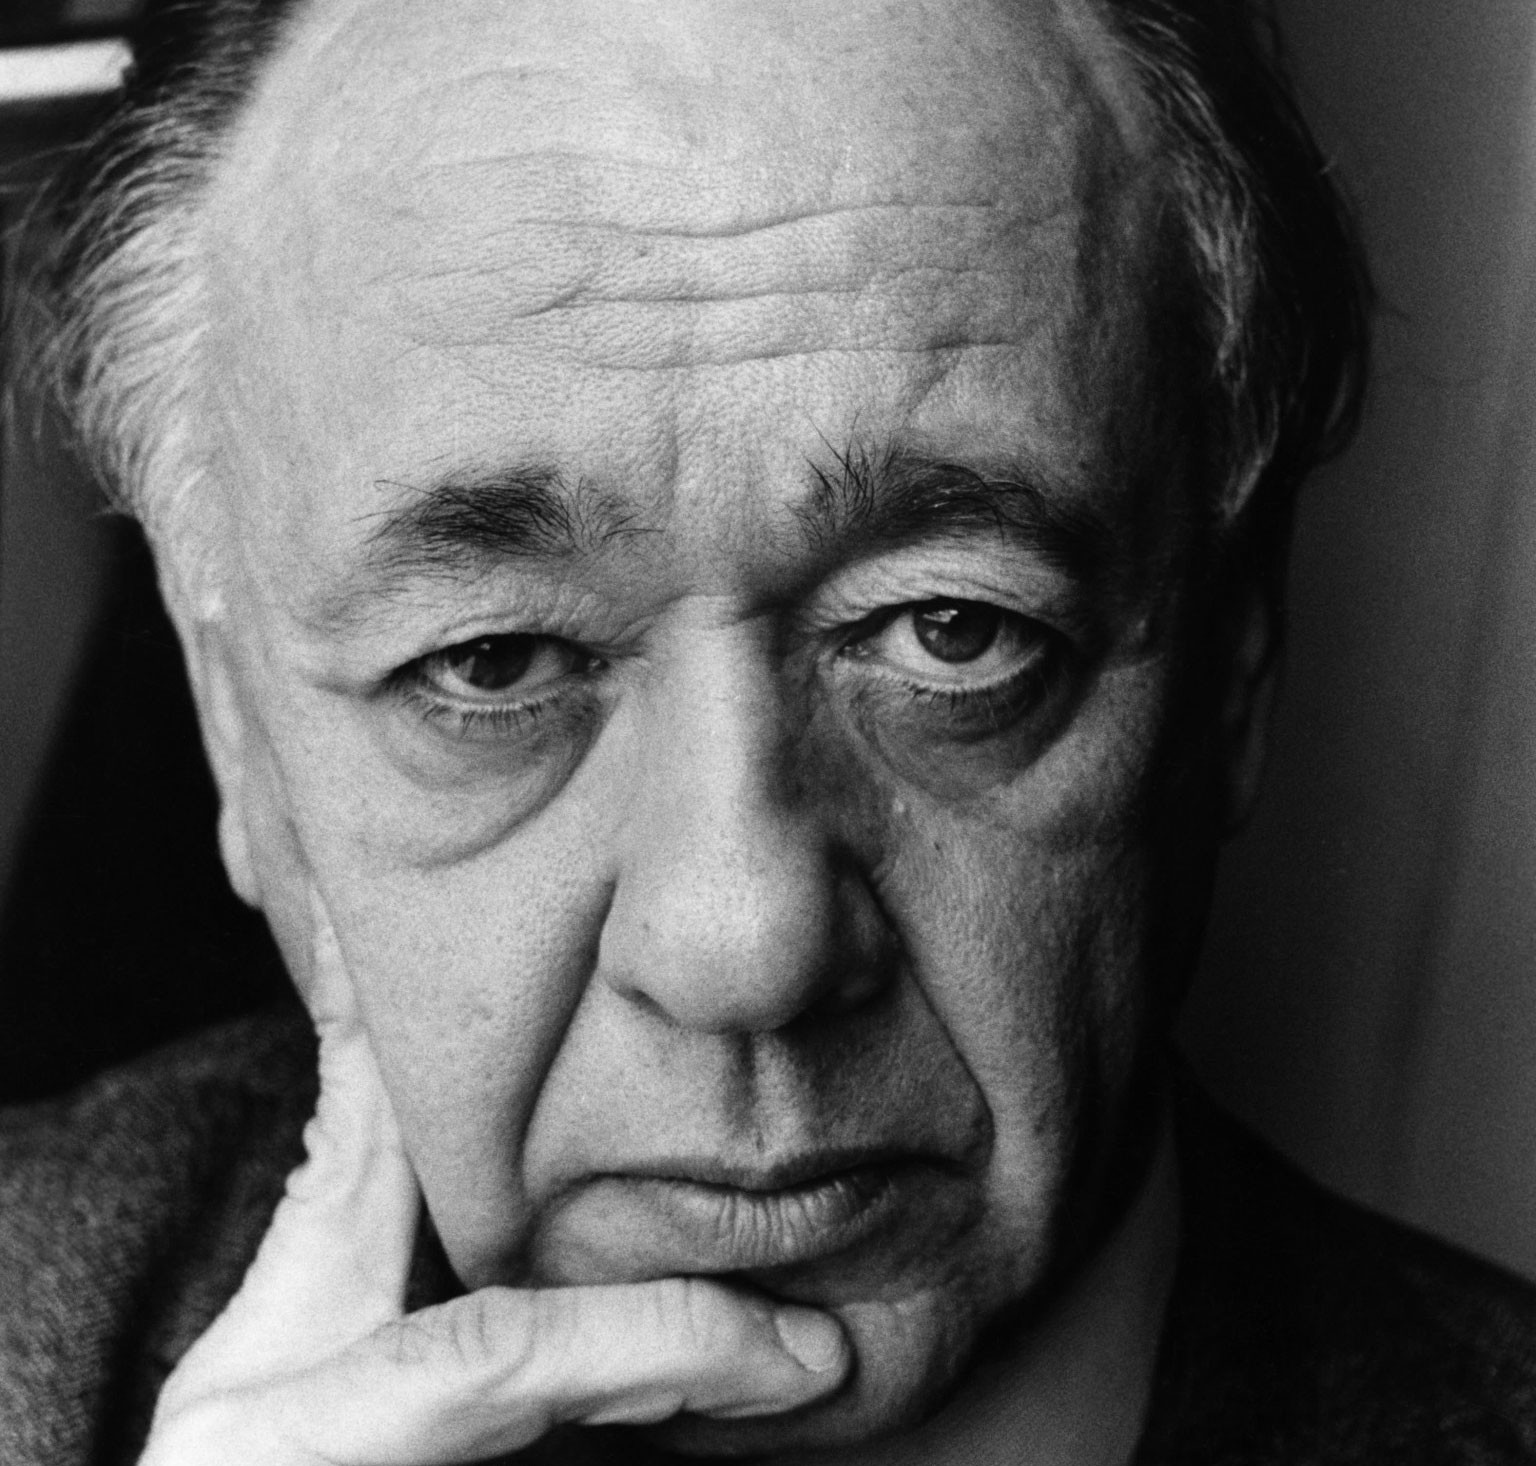 Ionesco & the limits of philosophy